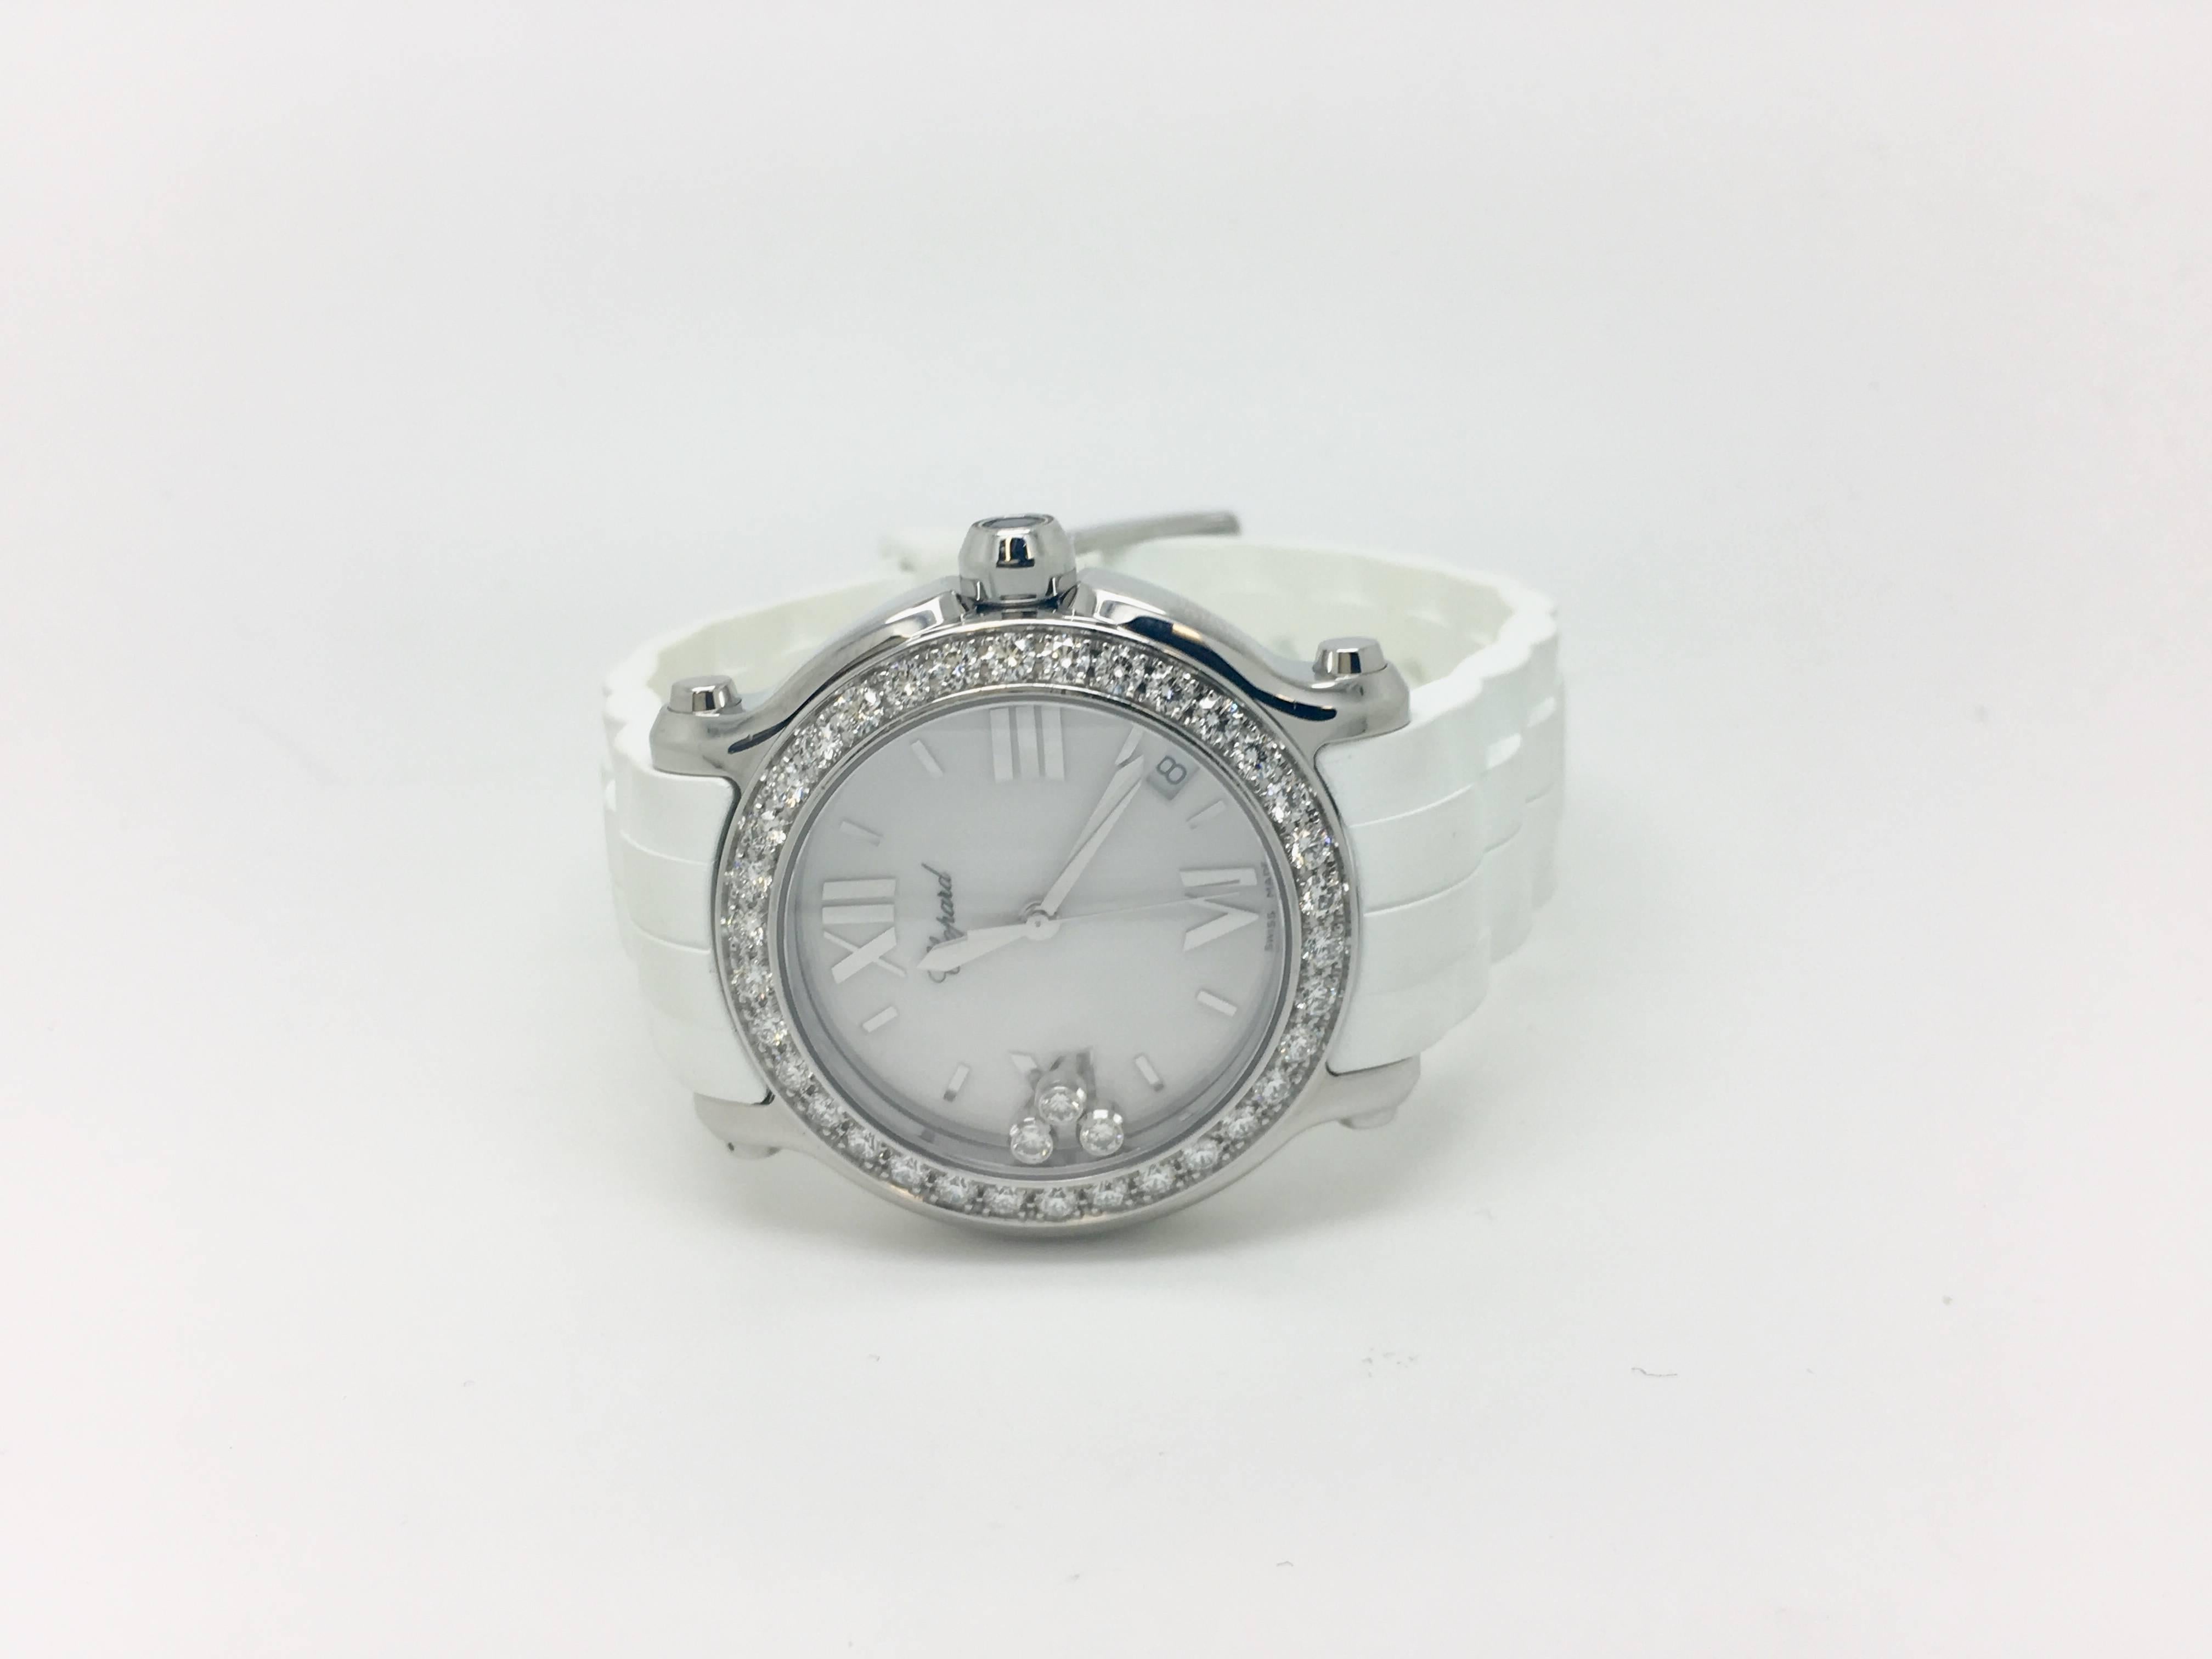 Chopard Happy Sport 36mm wristwatch with diamond bezel and quartz movement. It has a stainless steel 12mm thick case and beautiful diamond bezel with moving diamonds on face of timepiece. This item is pre-owned and has a rubber white strap that